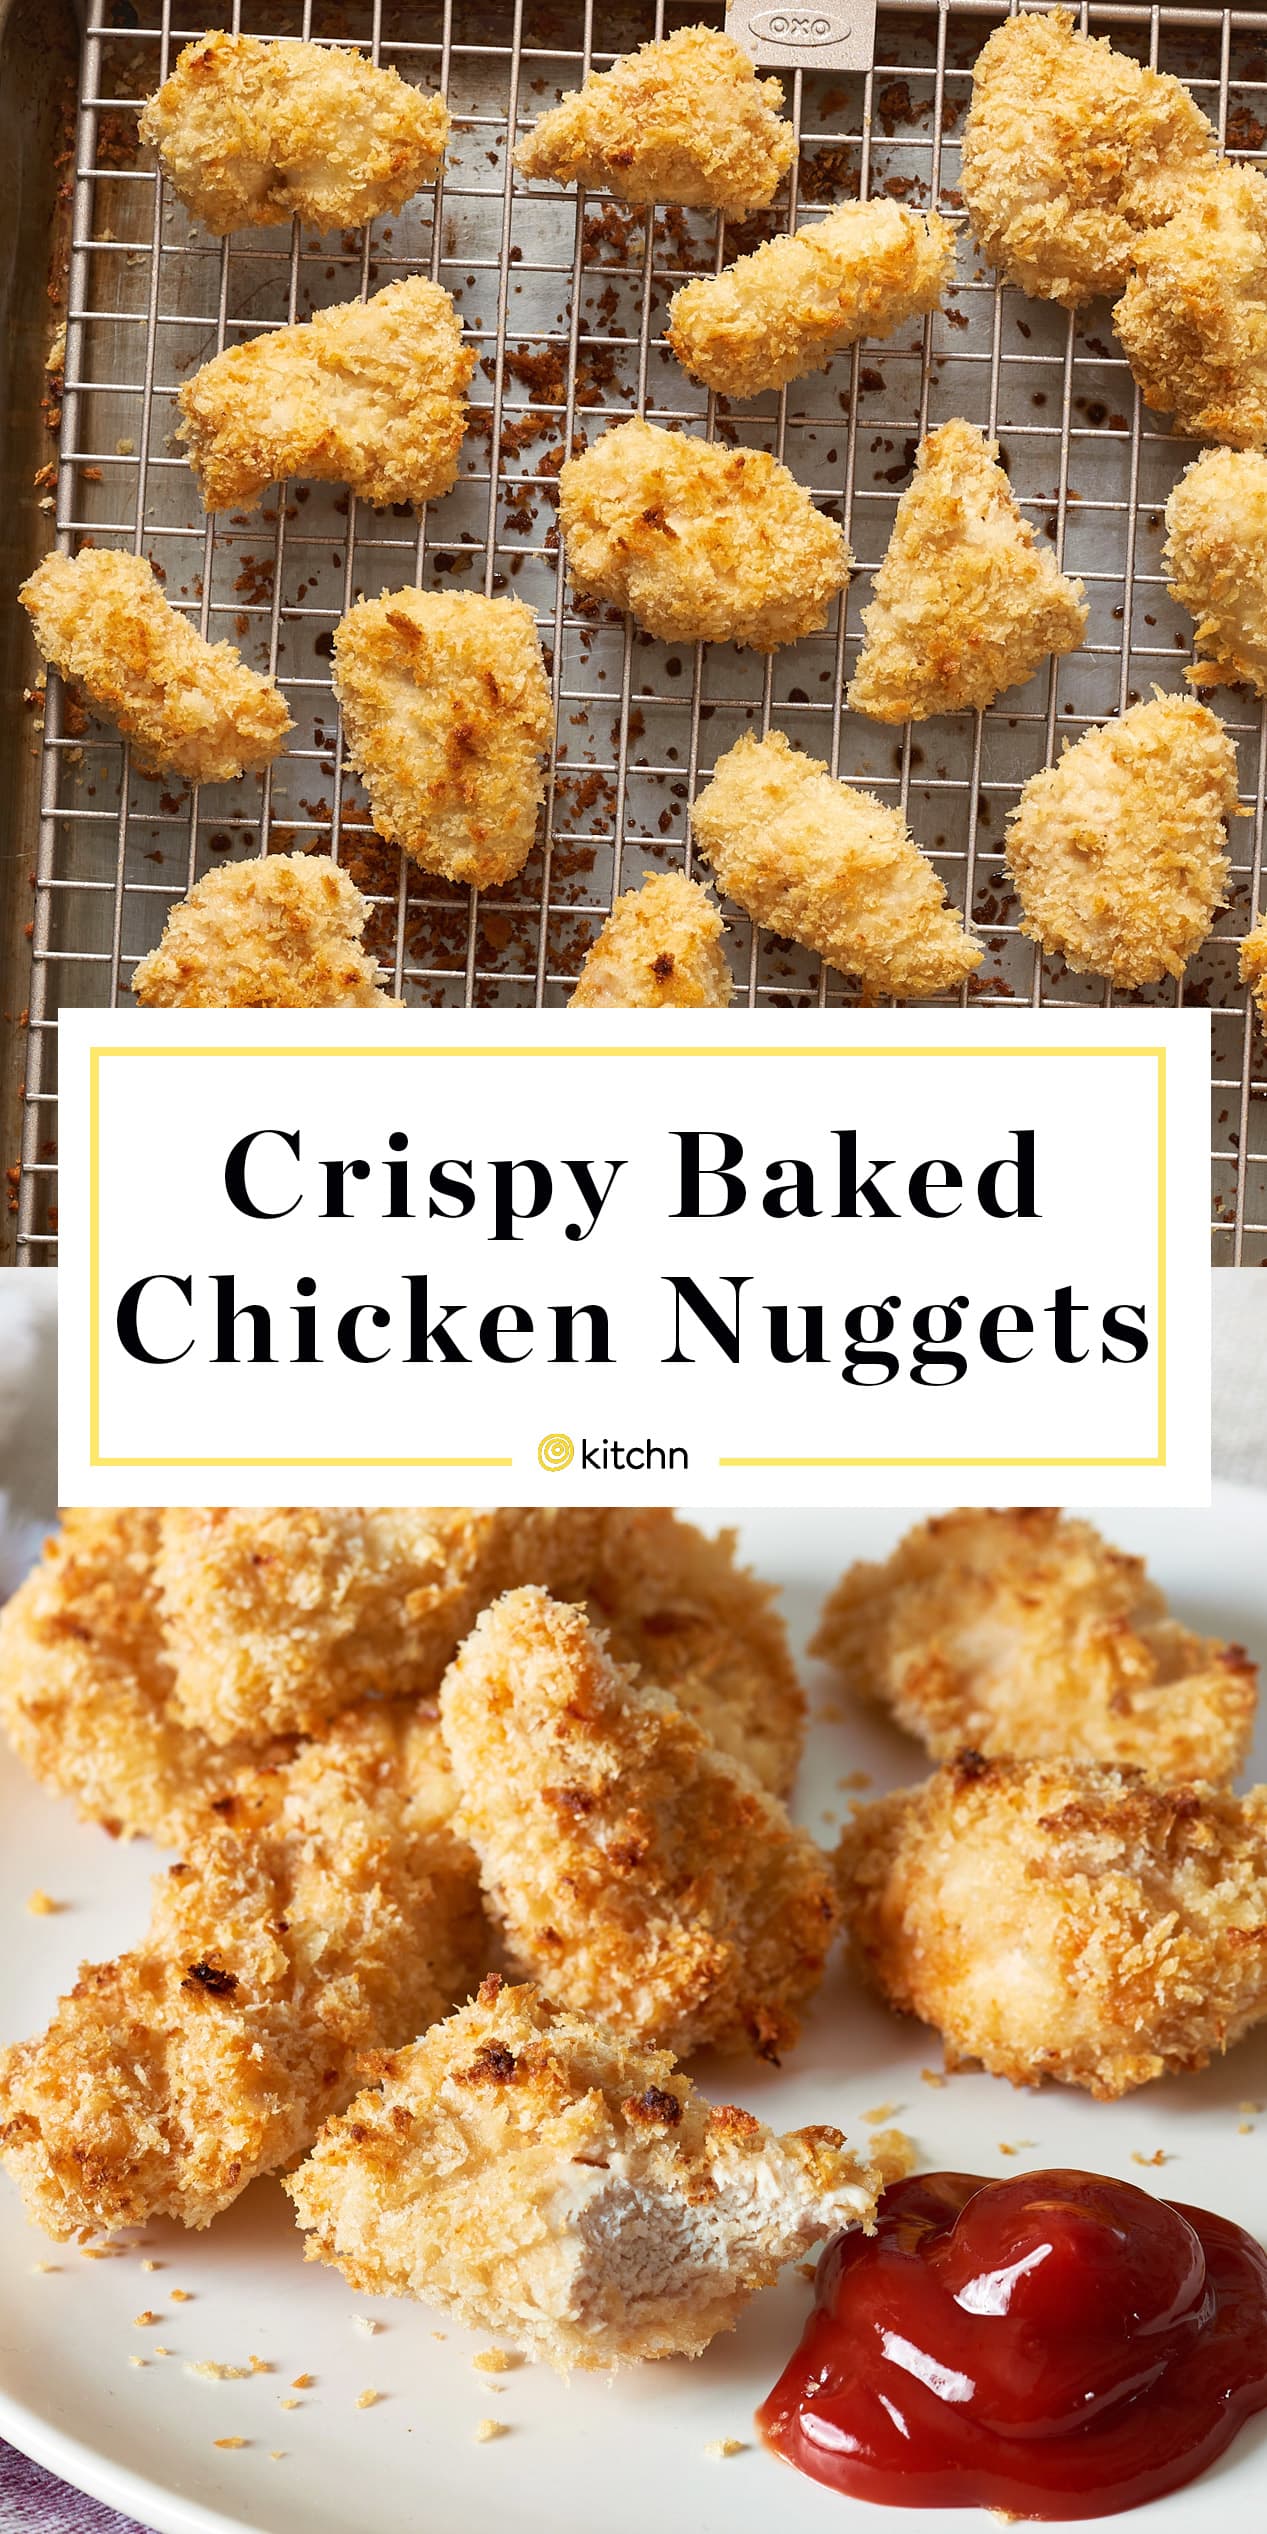 Easy Chicken Nuggets Recipe Kitchn,How To Clean A Bathtub